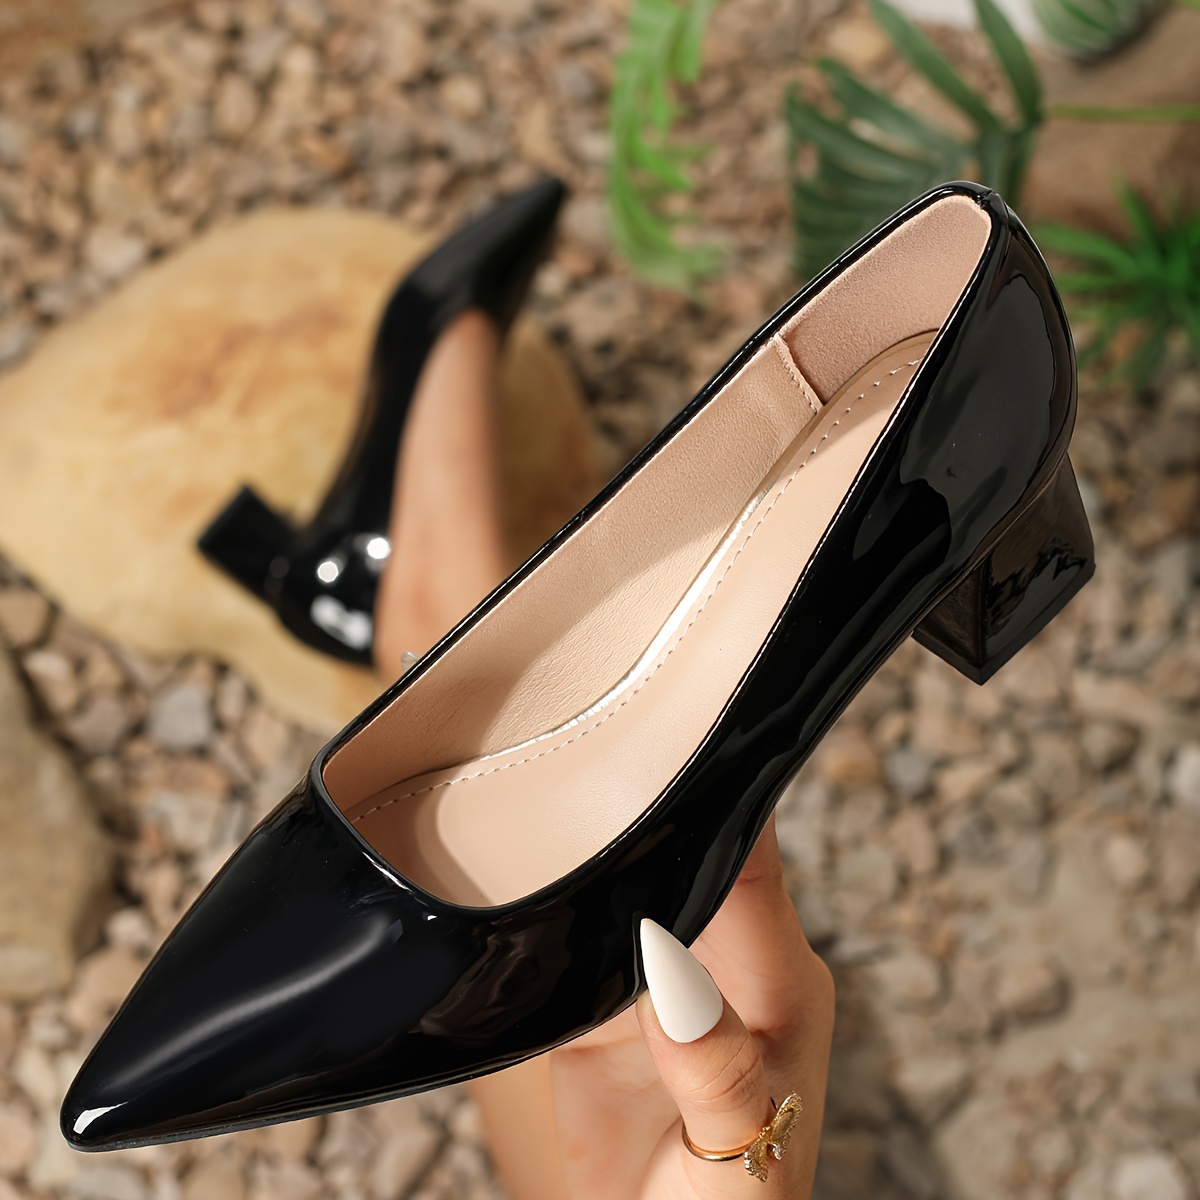 

Women's Court Pumps, Versatile Solid Color Pointed Toe Chunky Mid Heels, Suitable For Work, Office & Formal Occasions